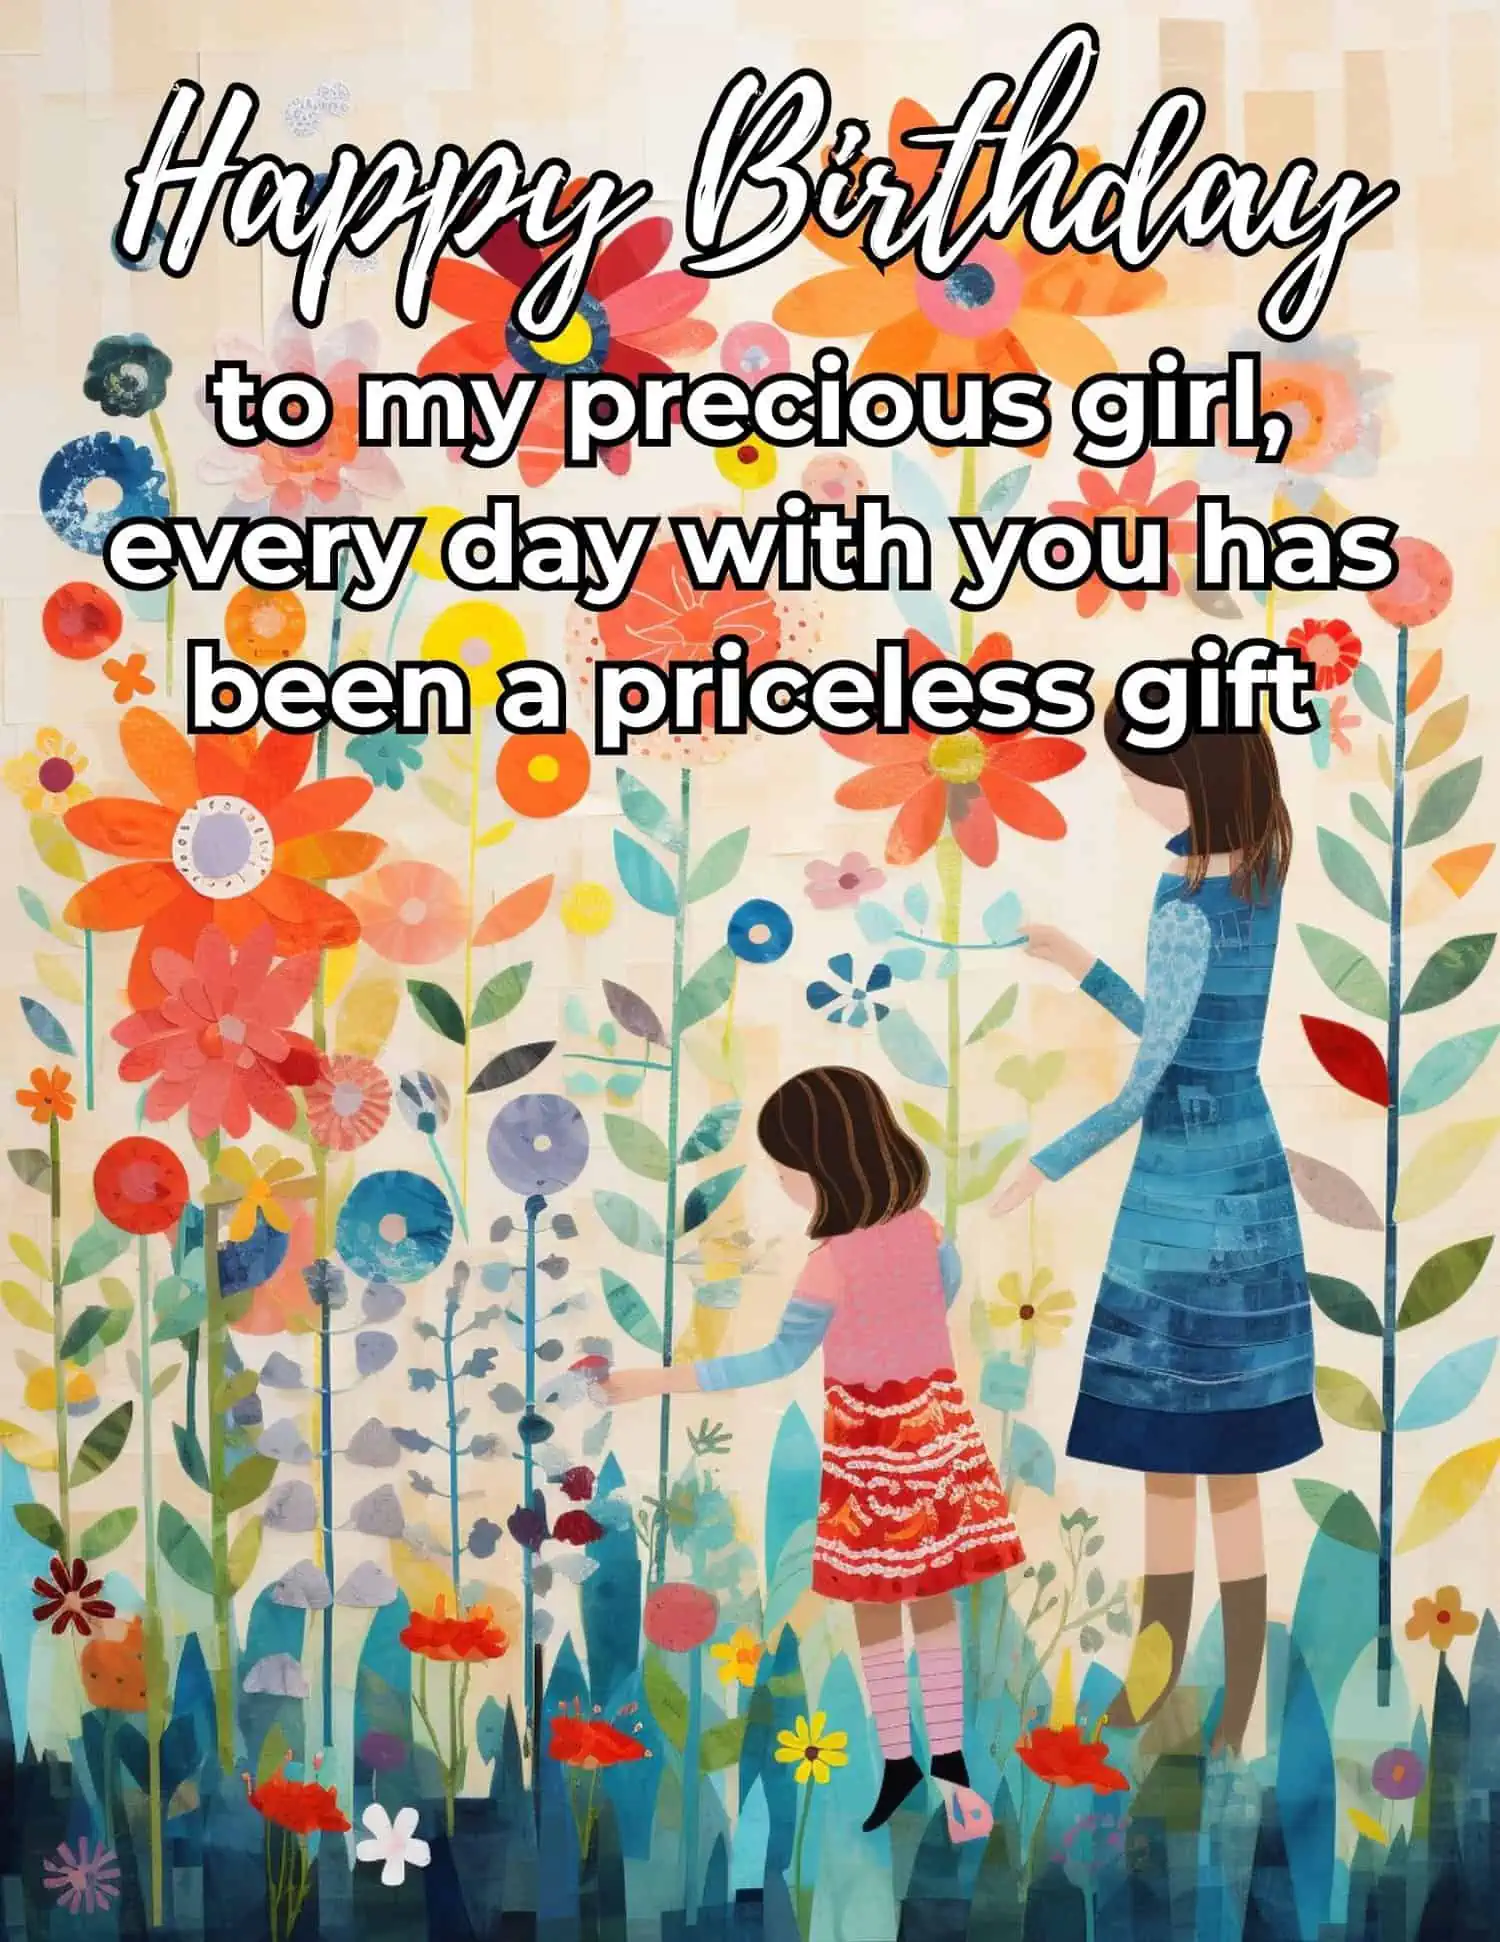 Emotional and touching birthday messages from a mother to her daughter.